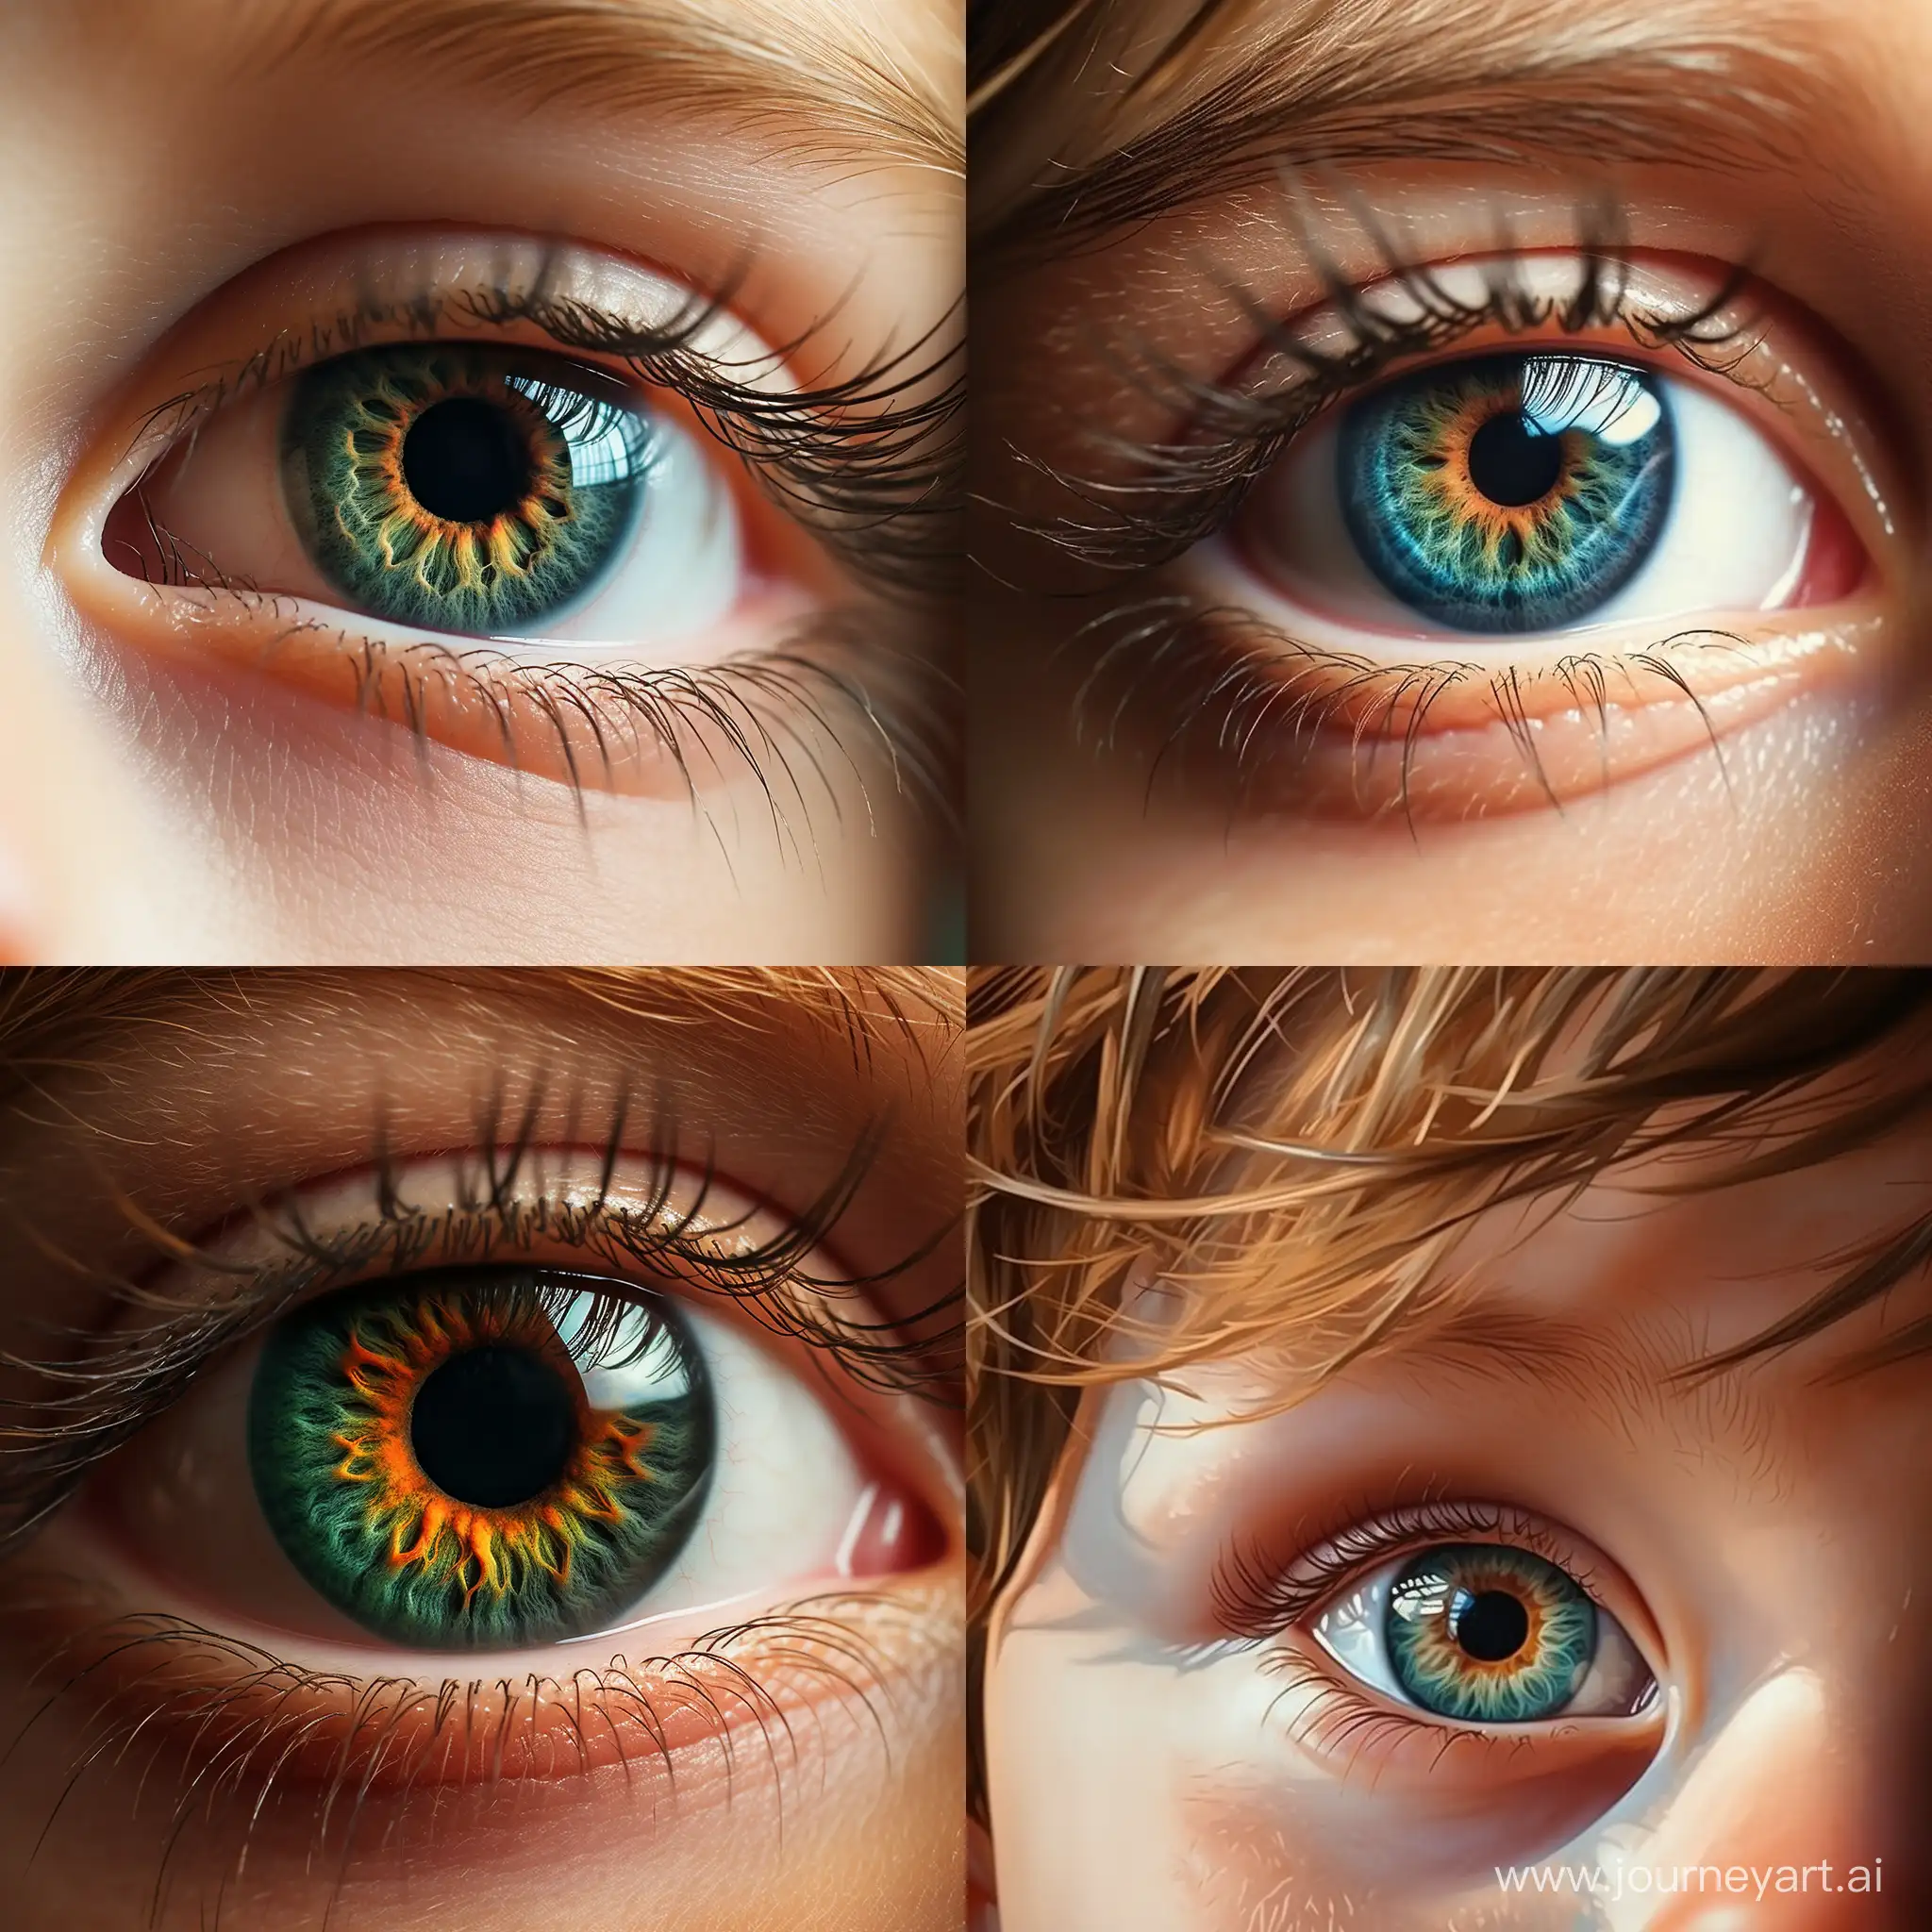 Captivating-CloseUp-of-Babys-Colorful-Eyes-in-HighQuality-Realistic-Photography